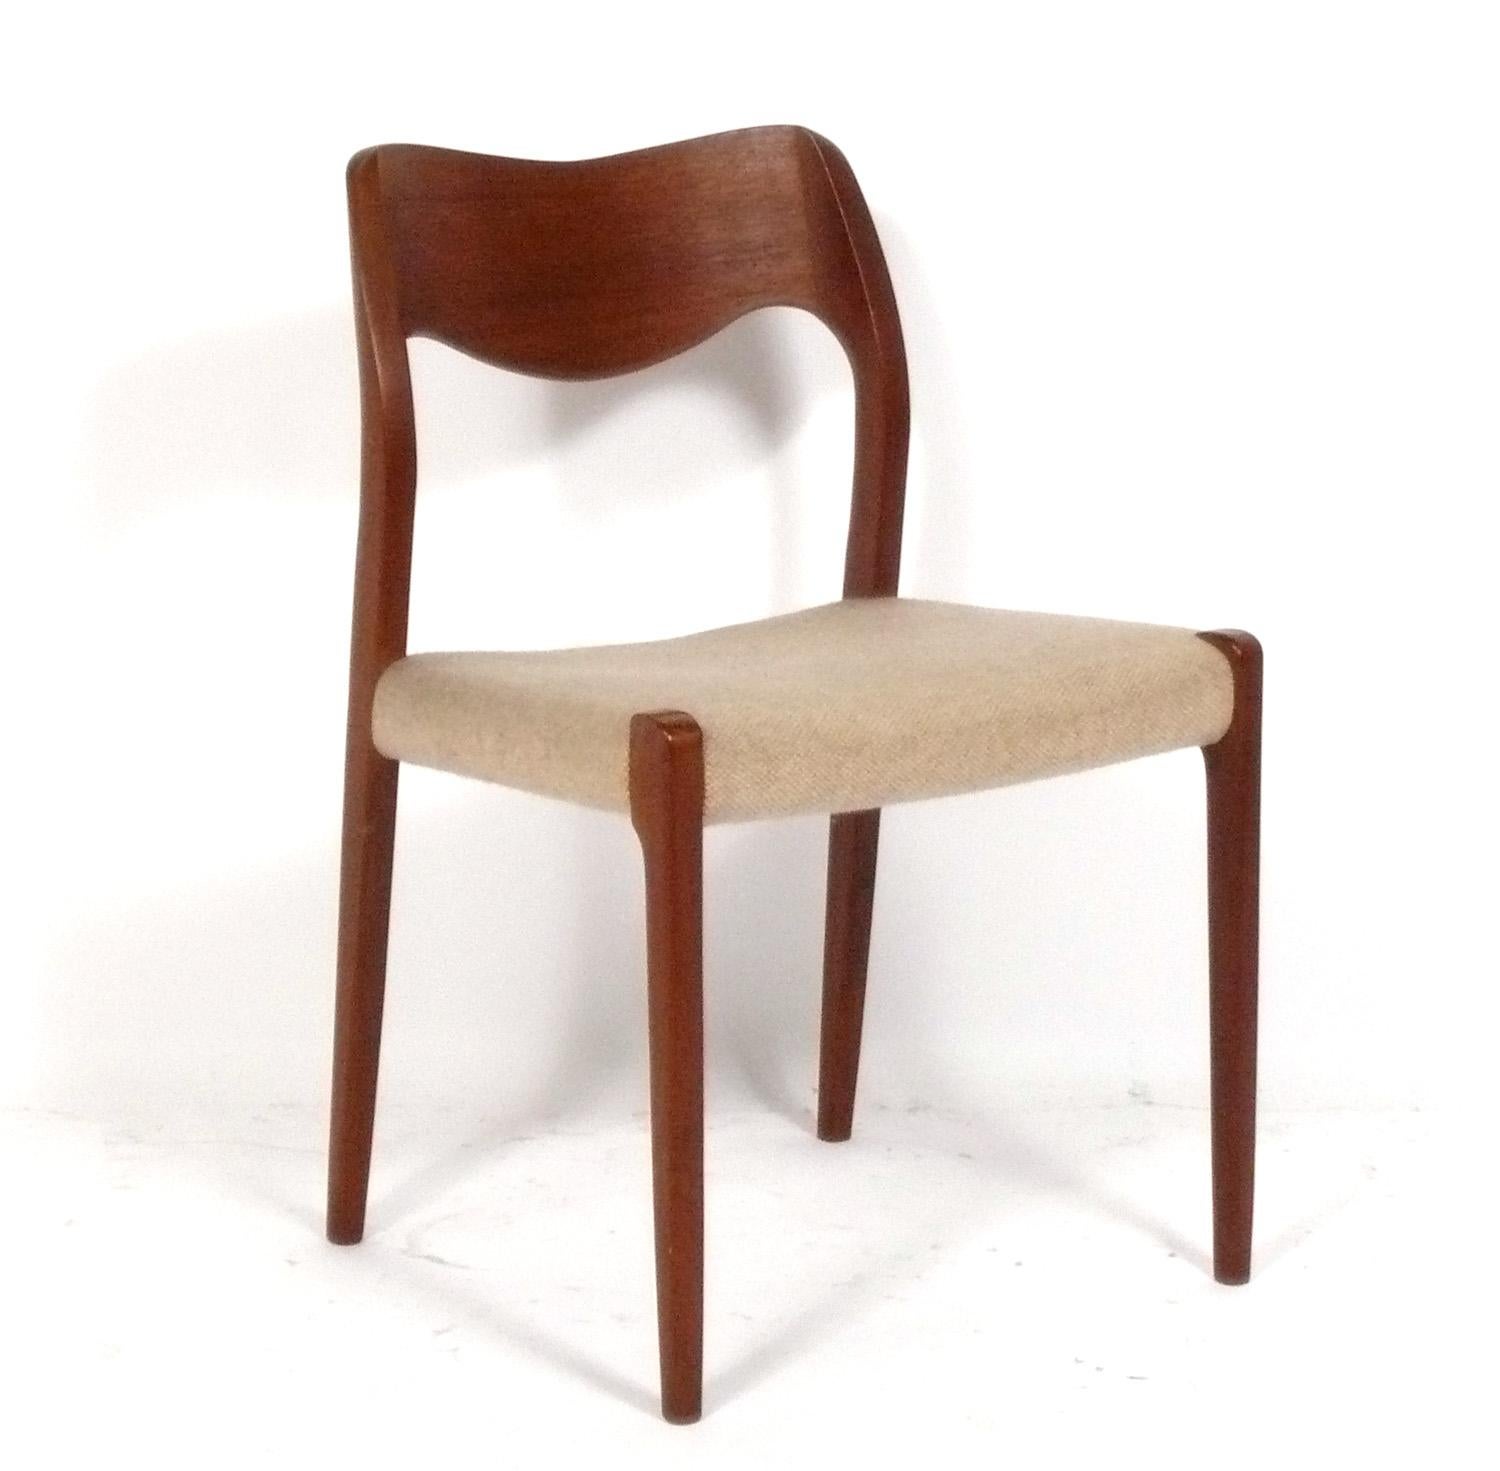 Set of Six Danish Modern Model 71 Dining Chairs, designed by Niels Moller for J.L. Moller, signed, Denmark, circa 1960s. The sculptural teak frames have been cleaned and Danish oiled. These chairs are currently being reupholstered and can be